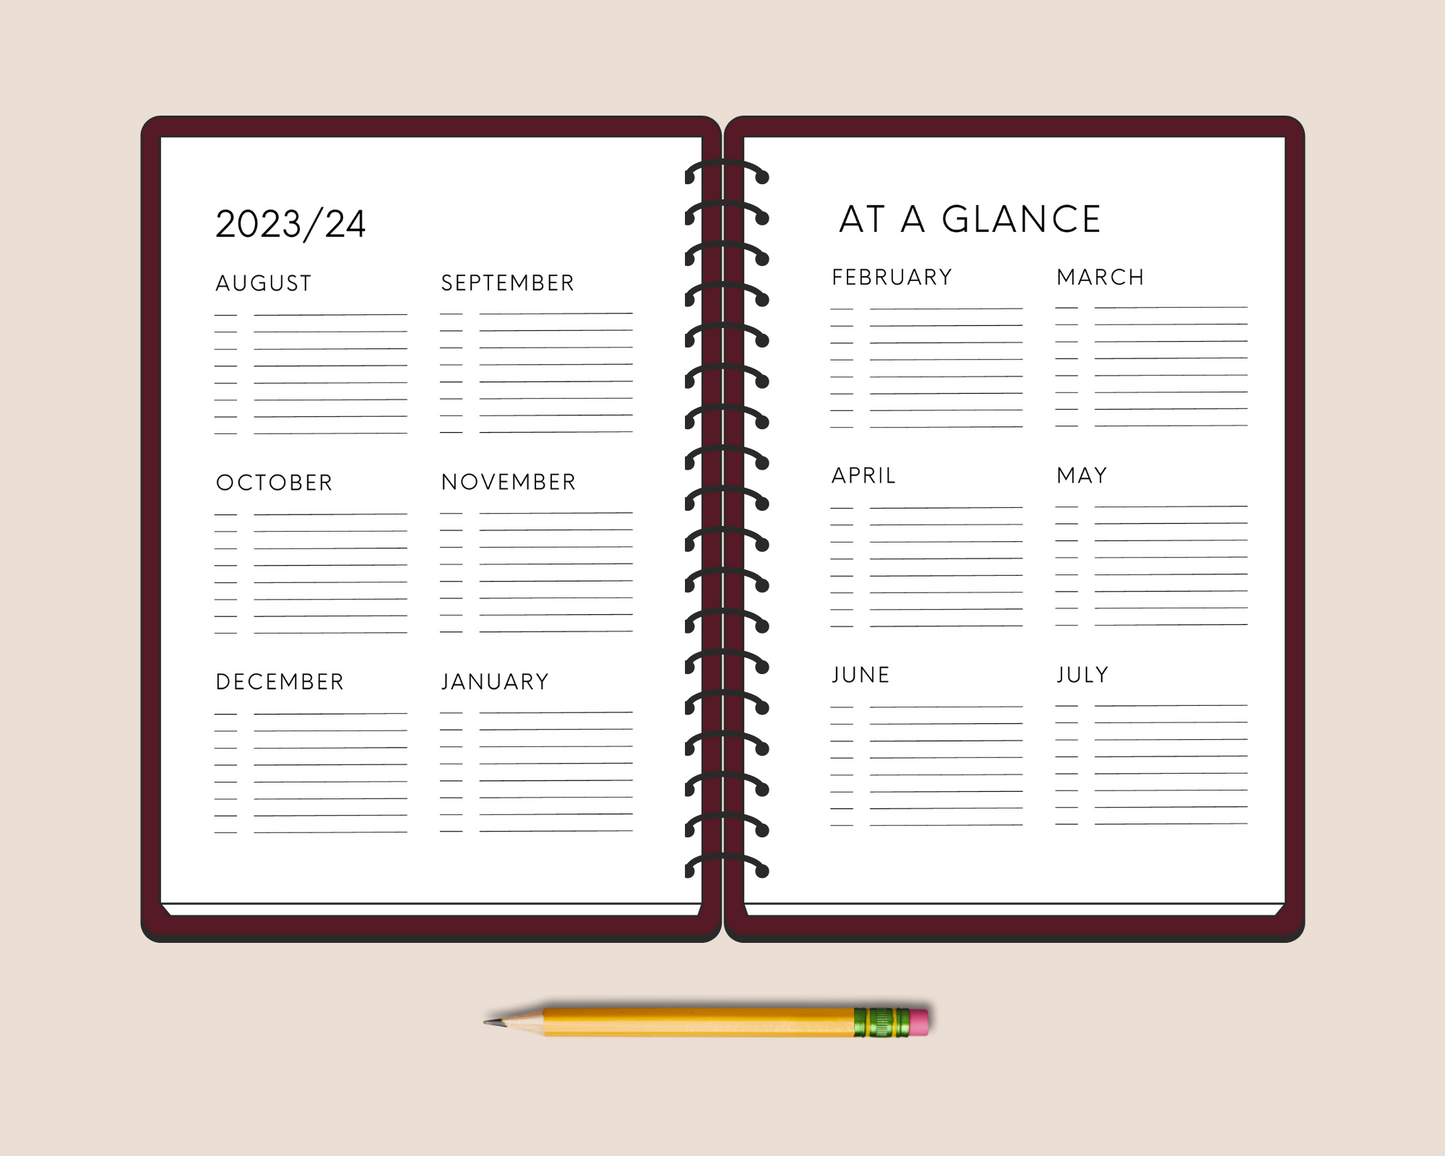 2023-2024 Year At A Glance on 2 Pages Printable PDF